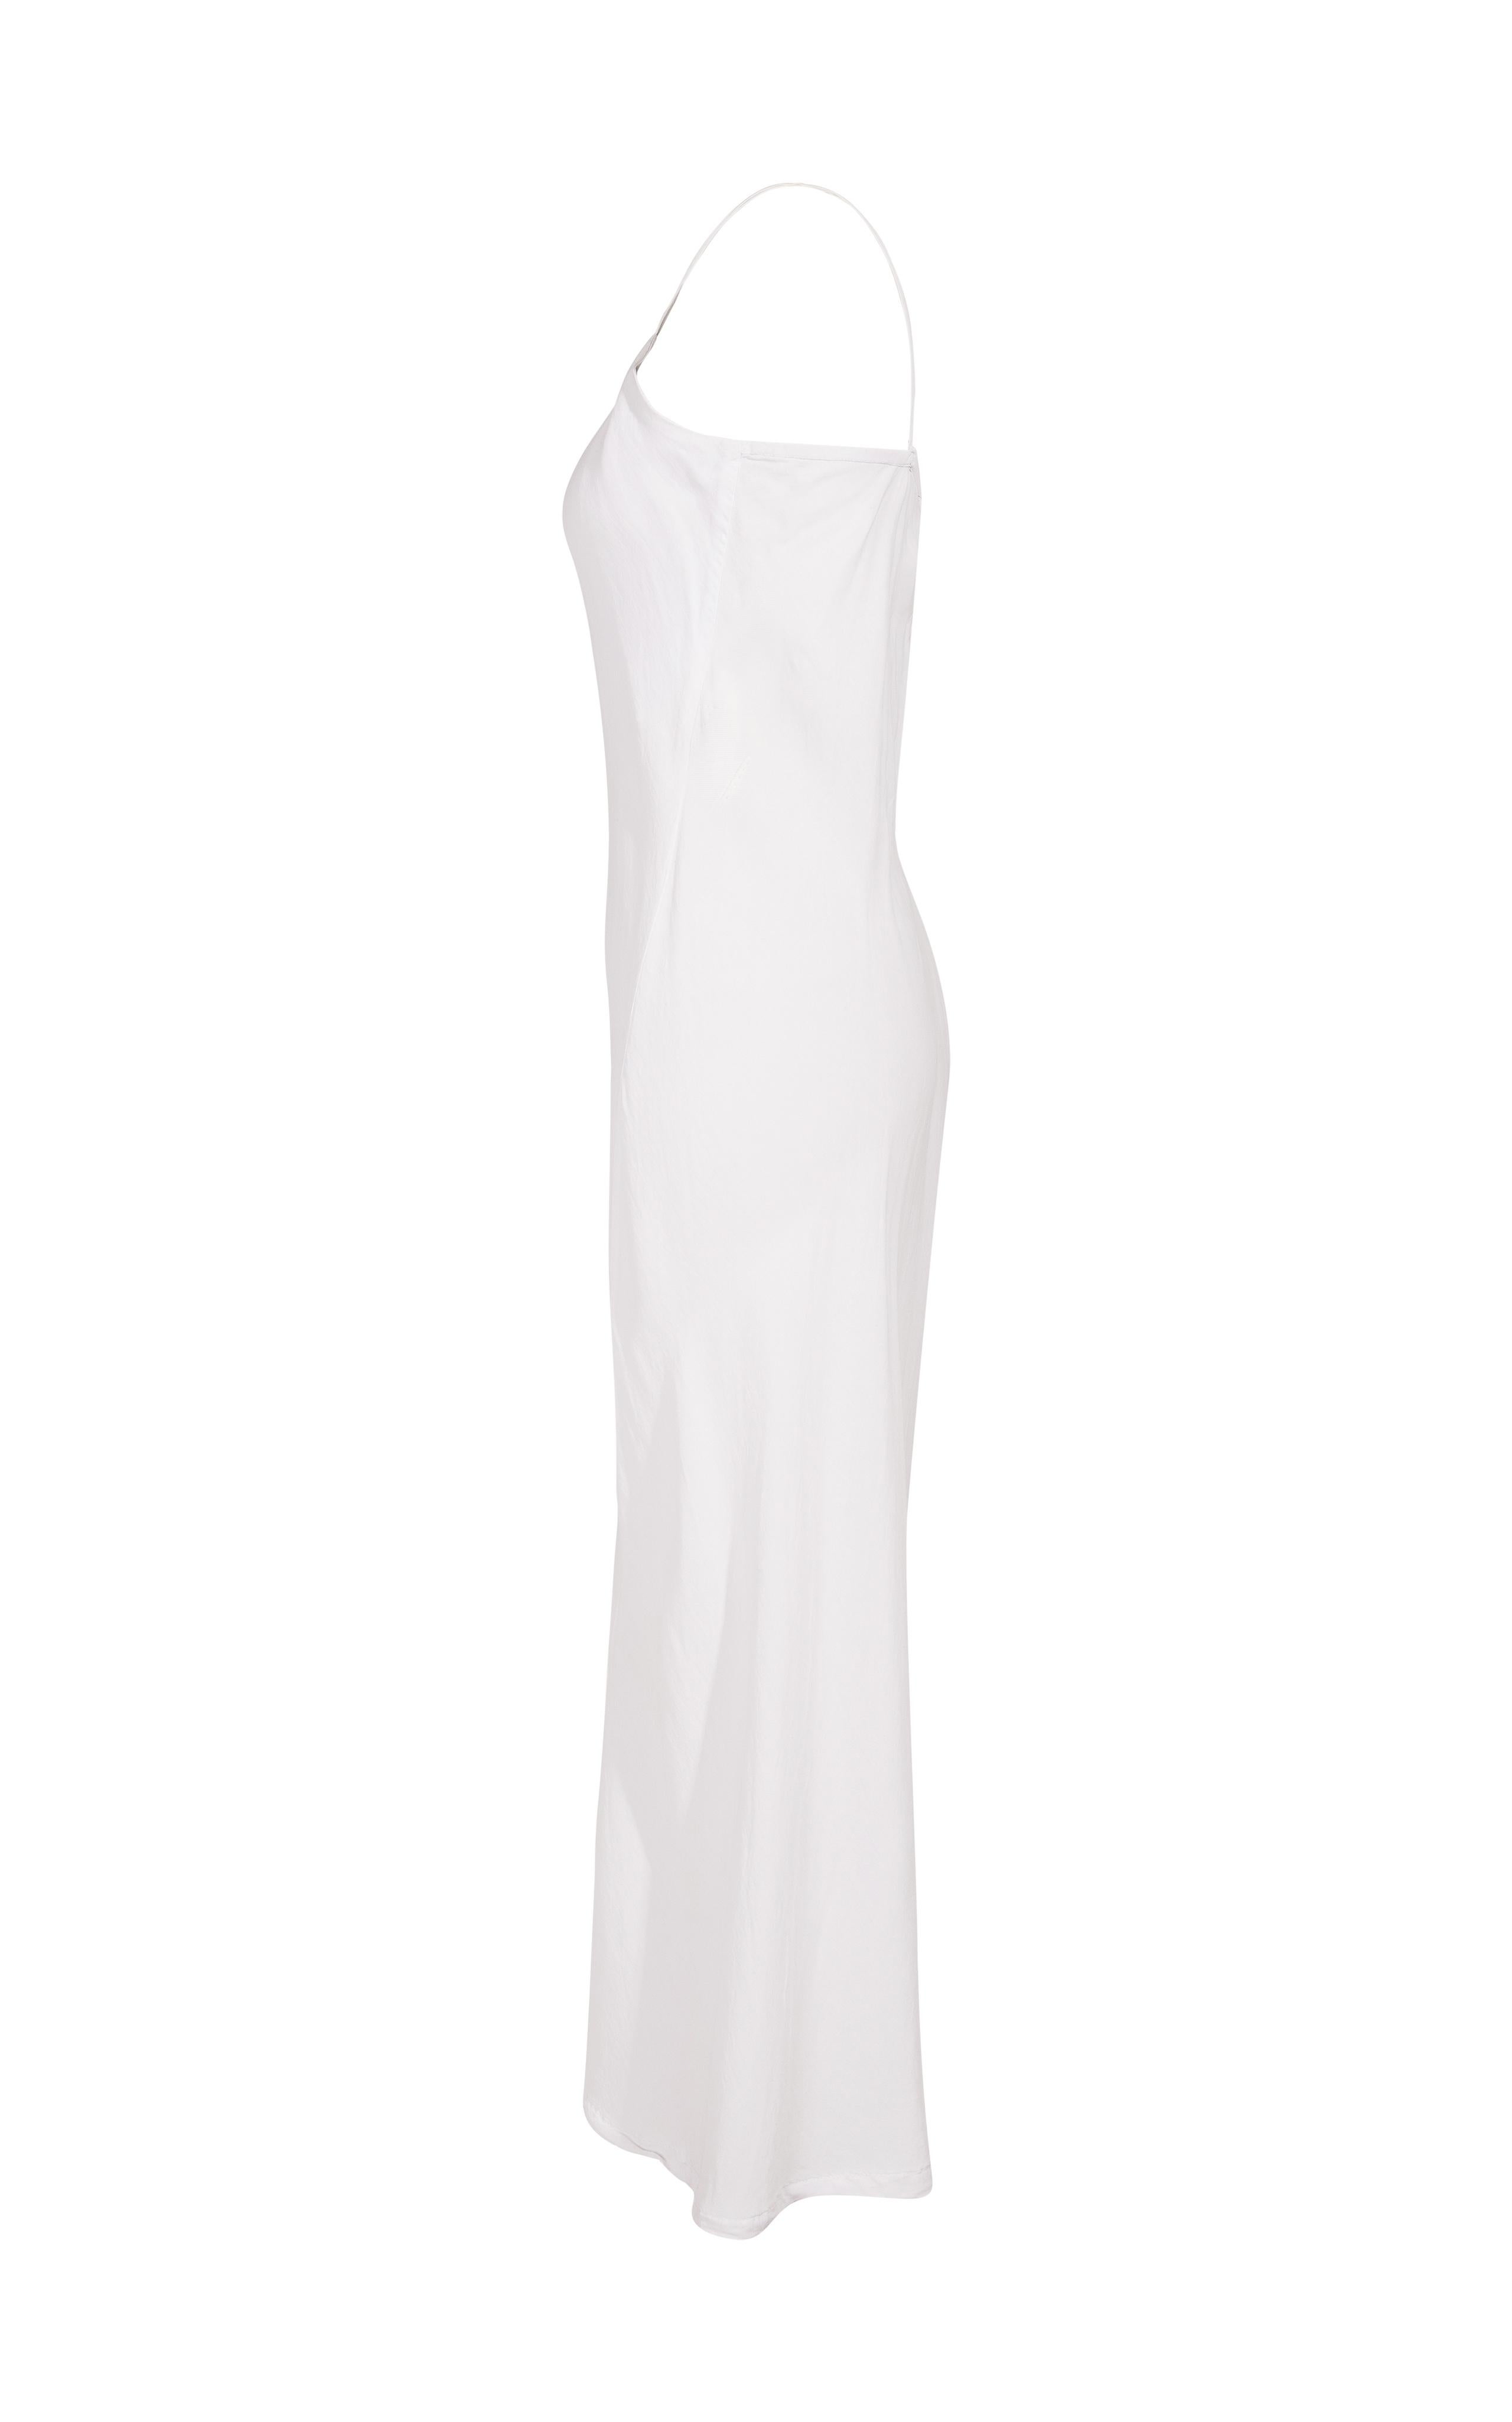 A/W 1994 Comme des Garcons white spaghetti strap maxi dress. Features slightly asymmetrical seam from hip to hem. Fabric feels like light cotton blend. 